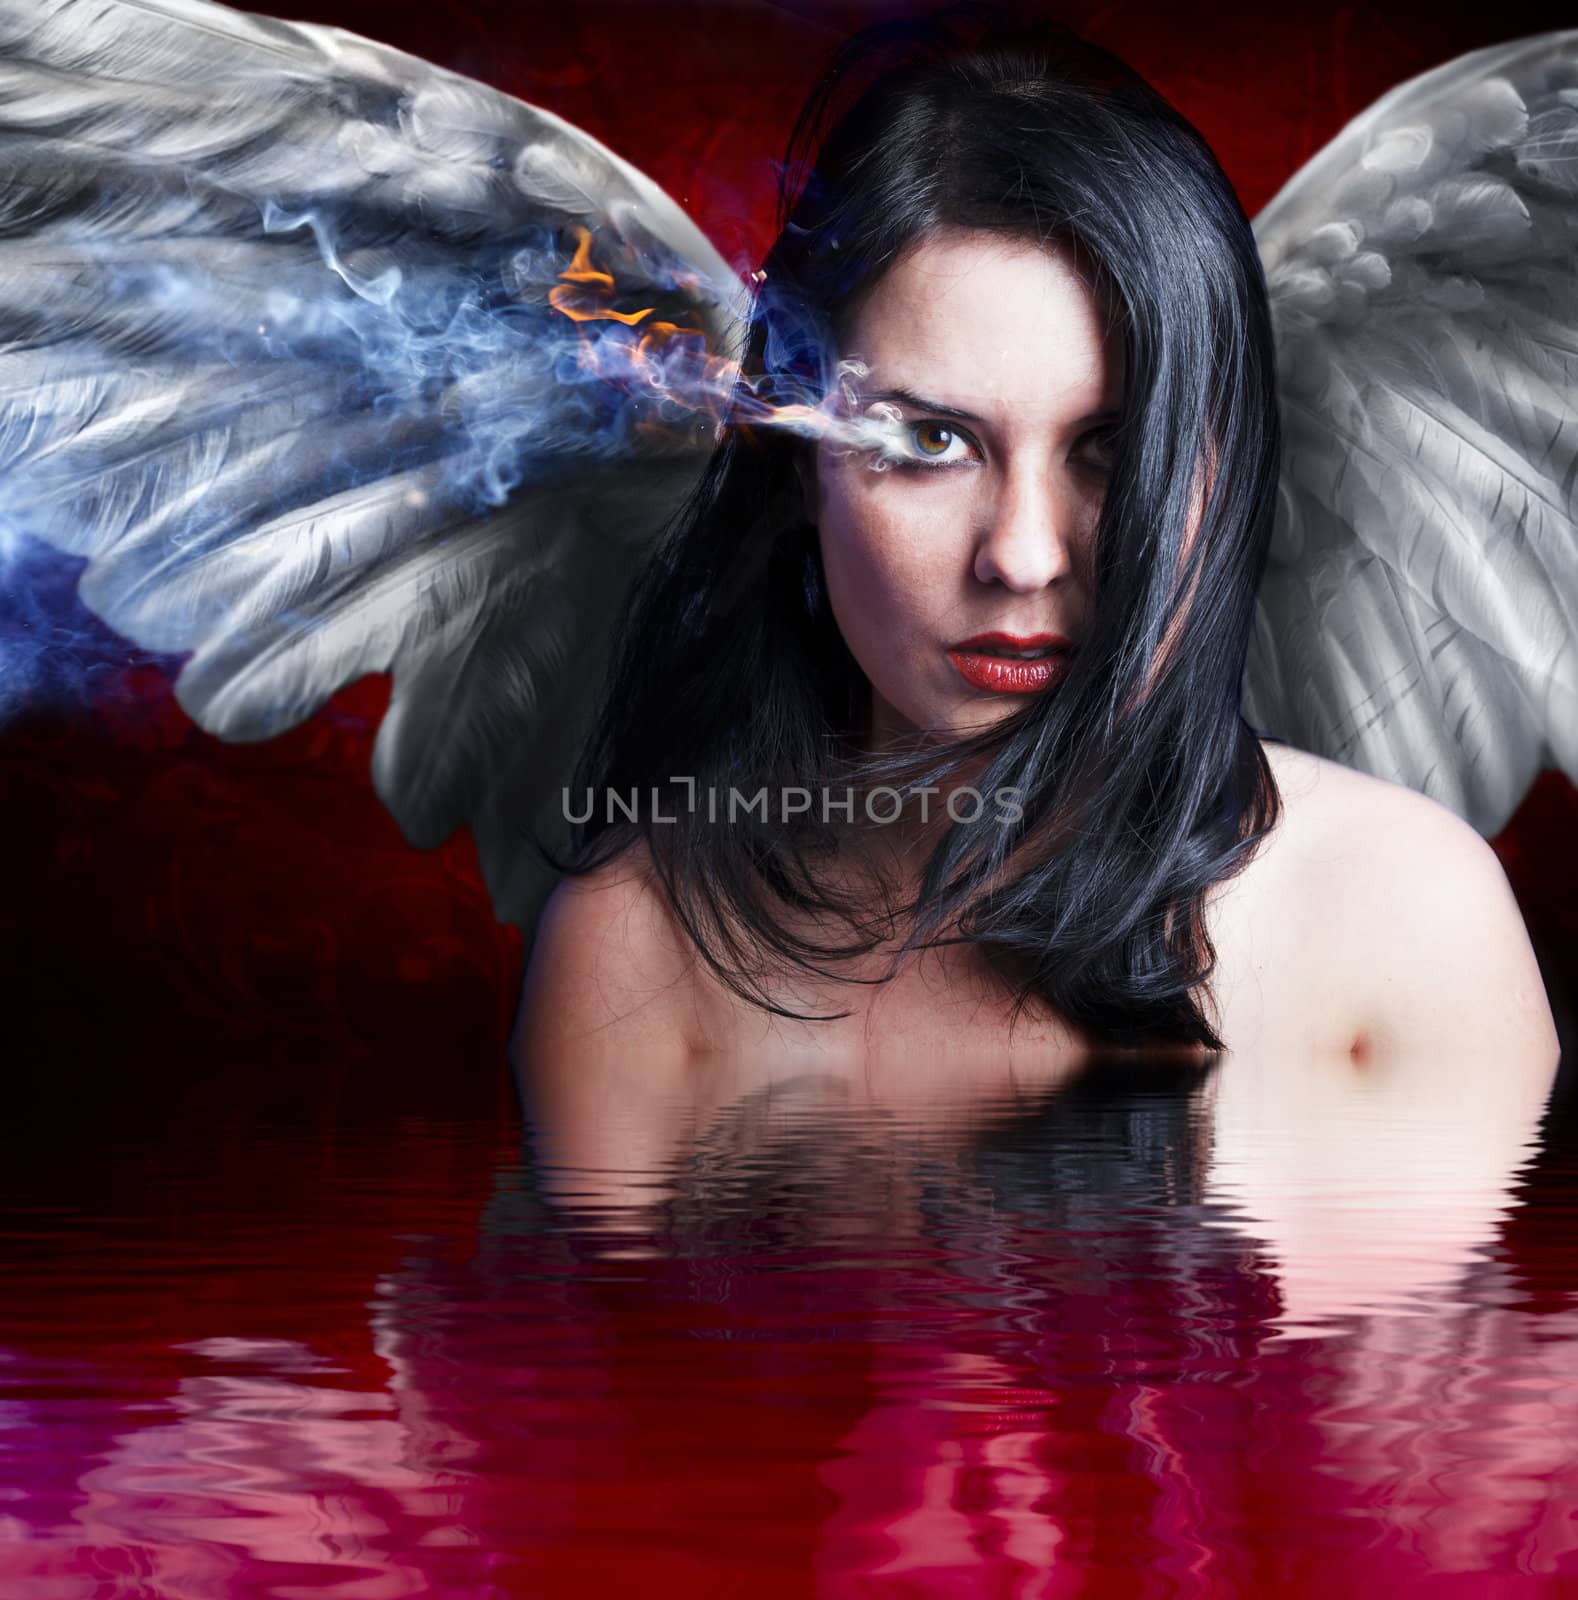 Angel angry, girl with burning eye over blood water reflection